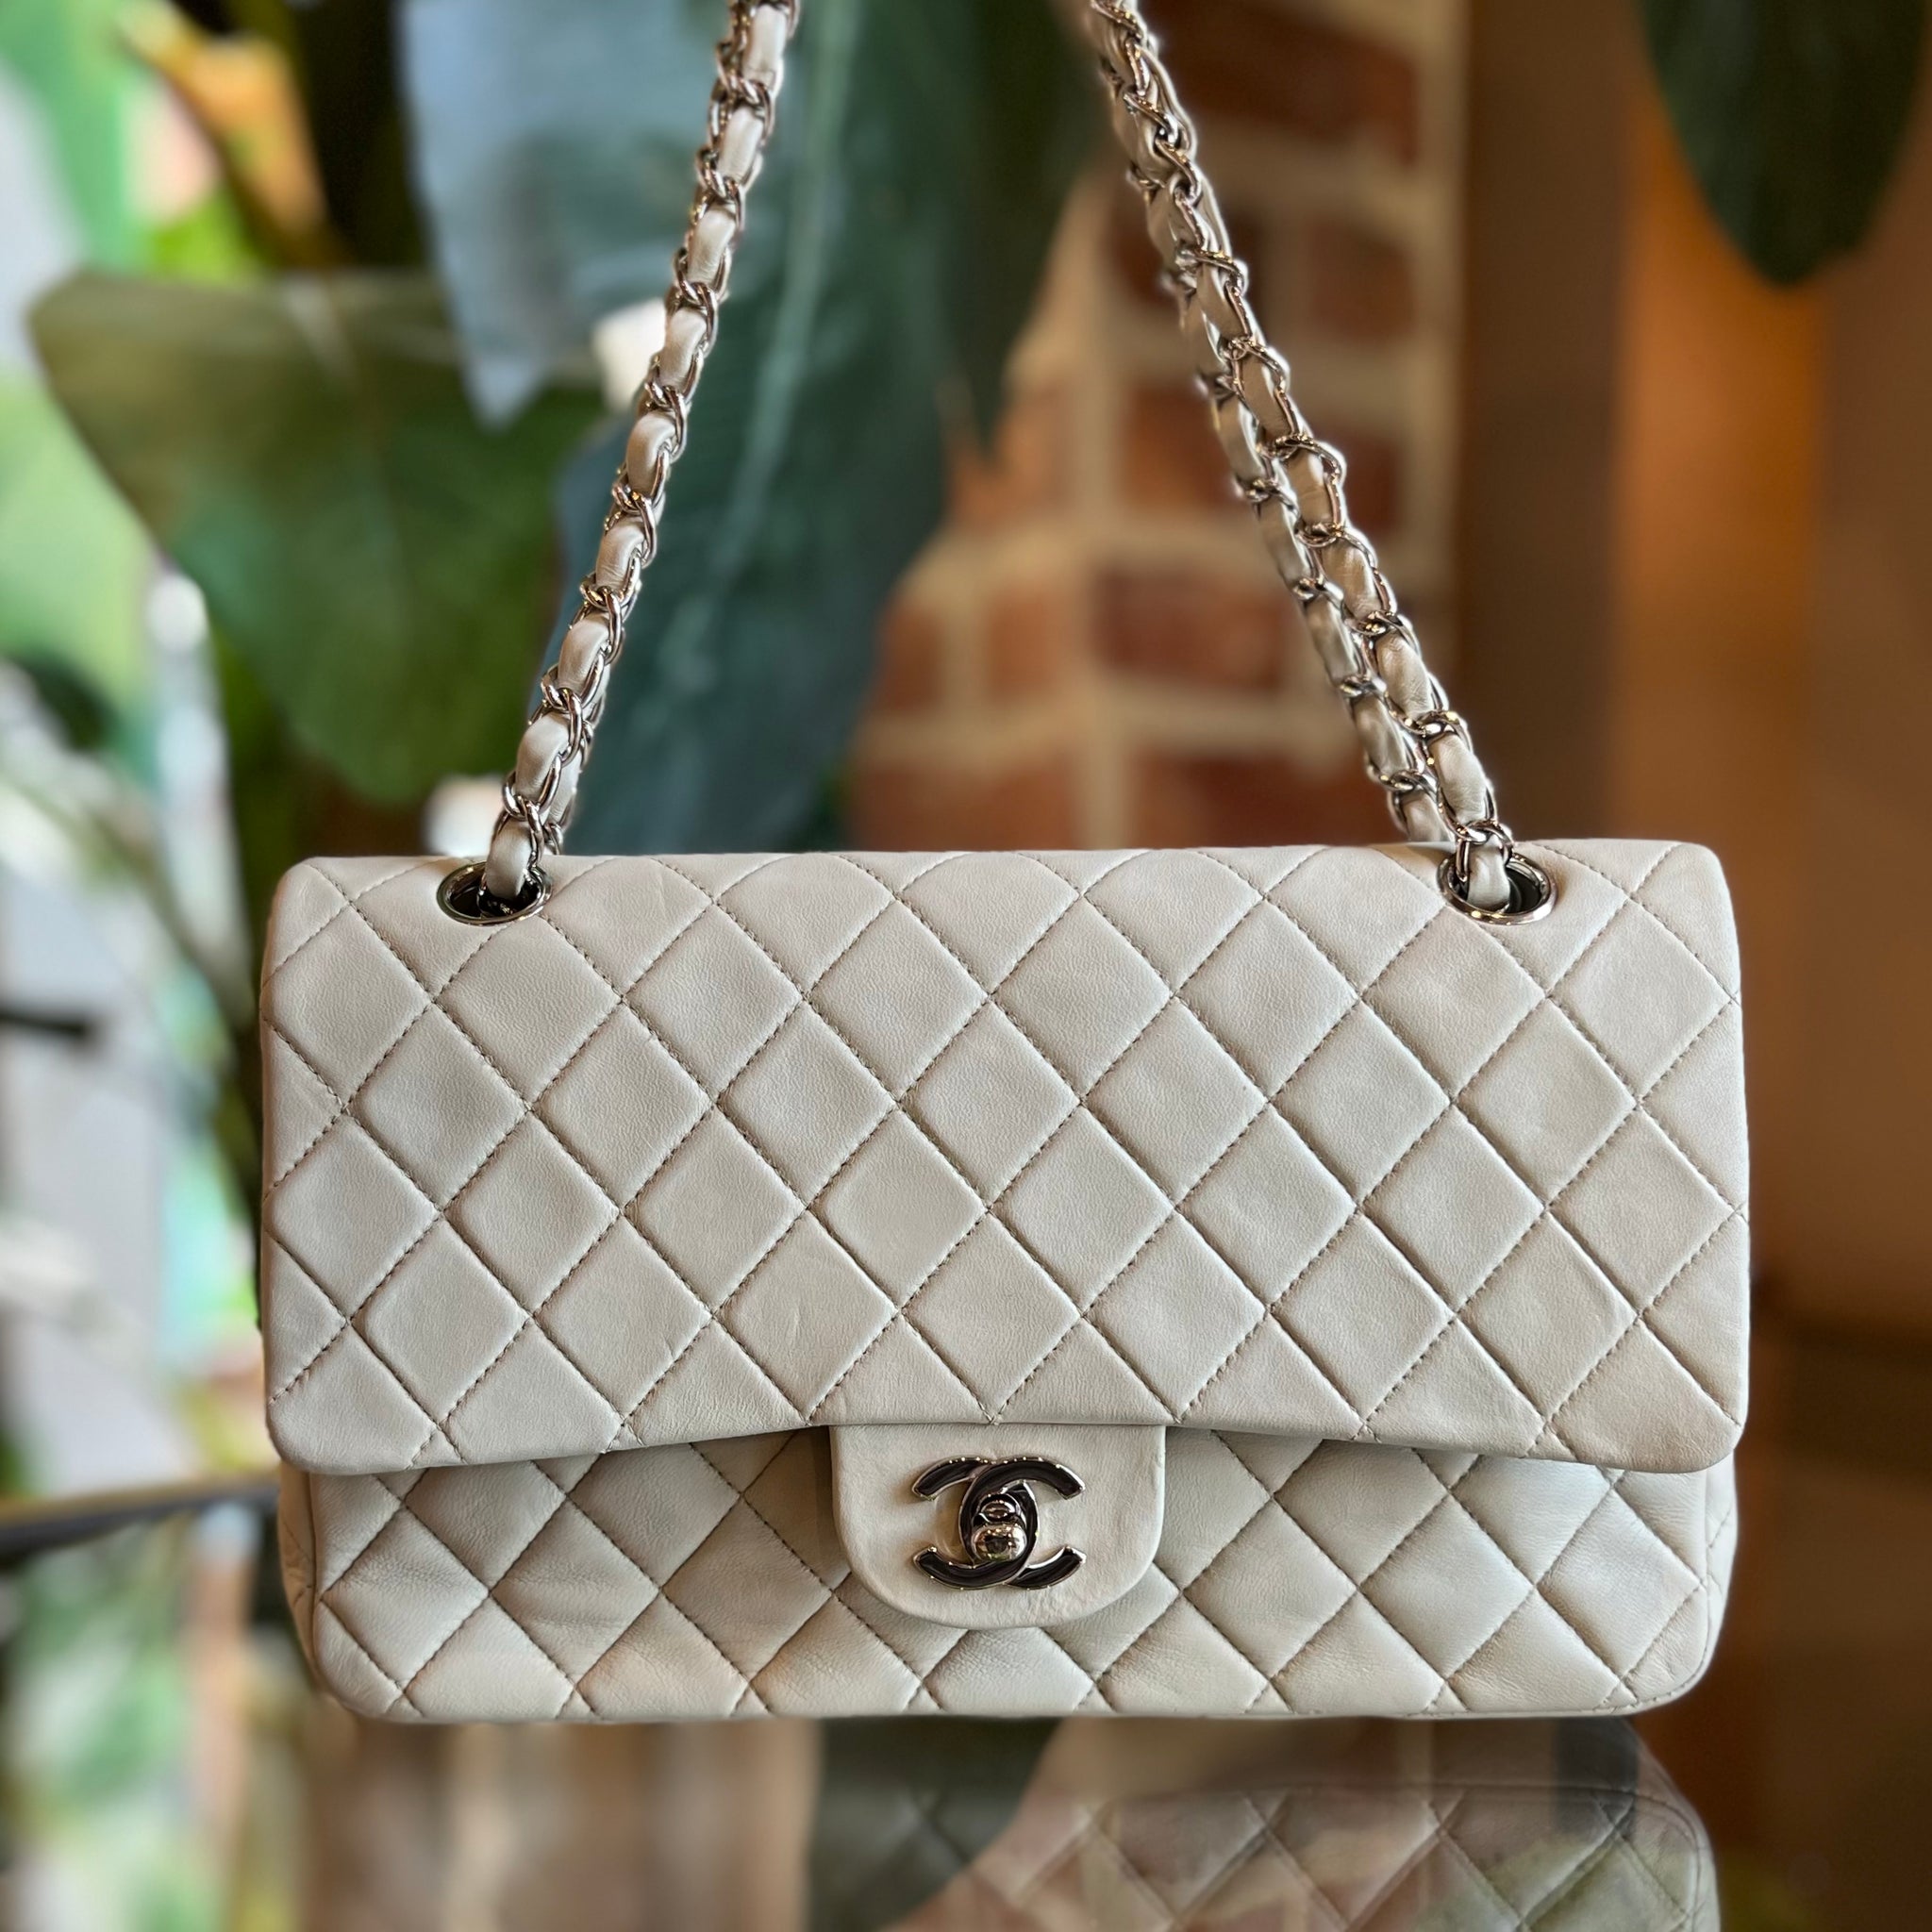 Chanel Grey Chevron Quilted Patent Leather Classic Medium Double Flap Bag